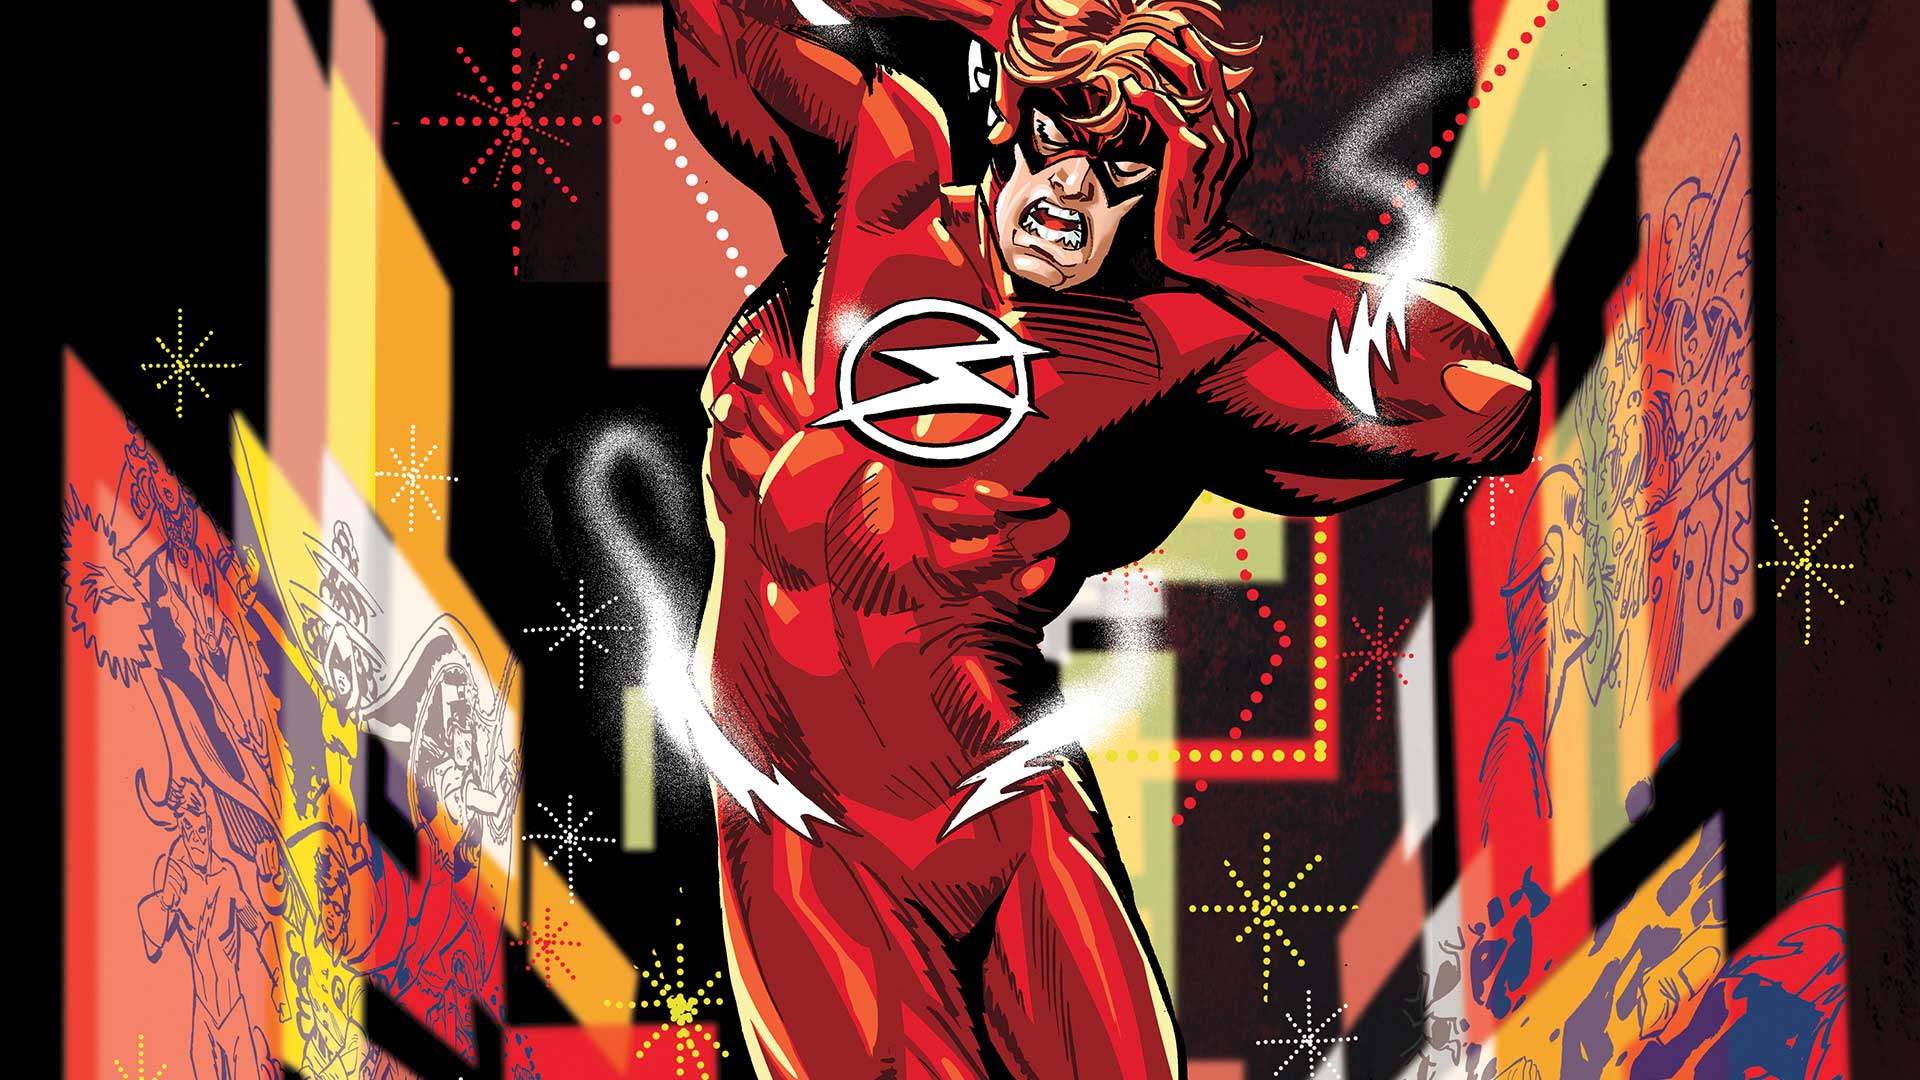 The Flash #46 review: Hunter Zolomon is back